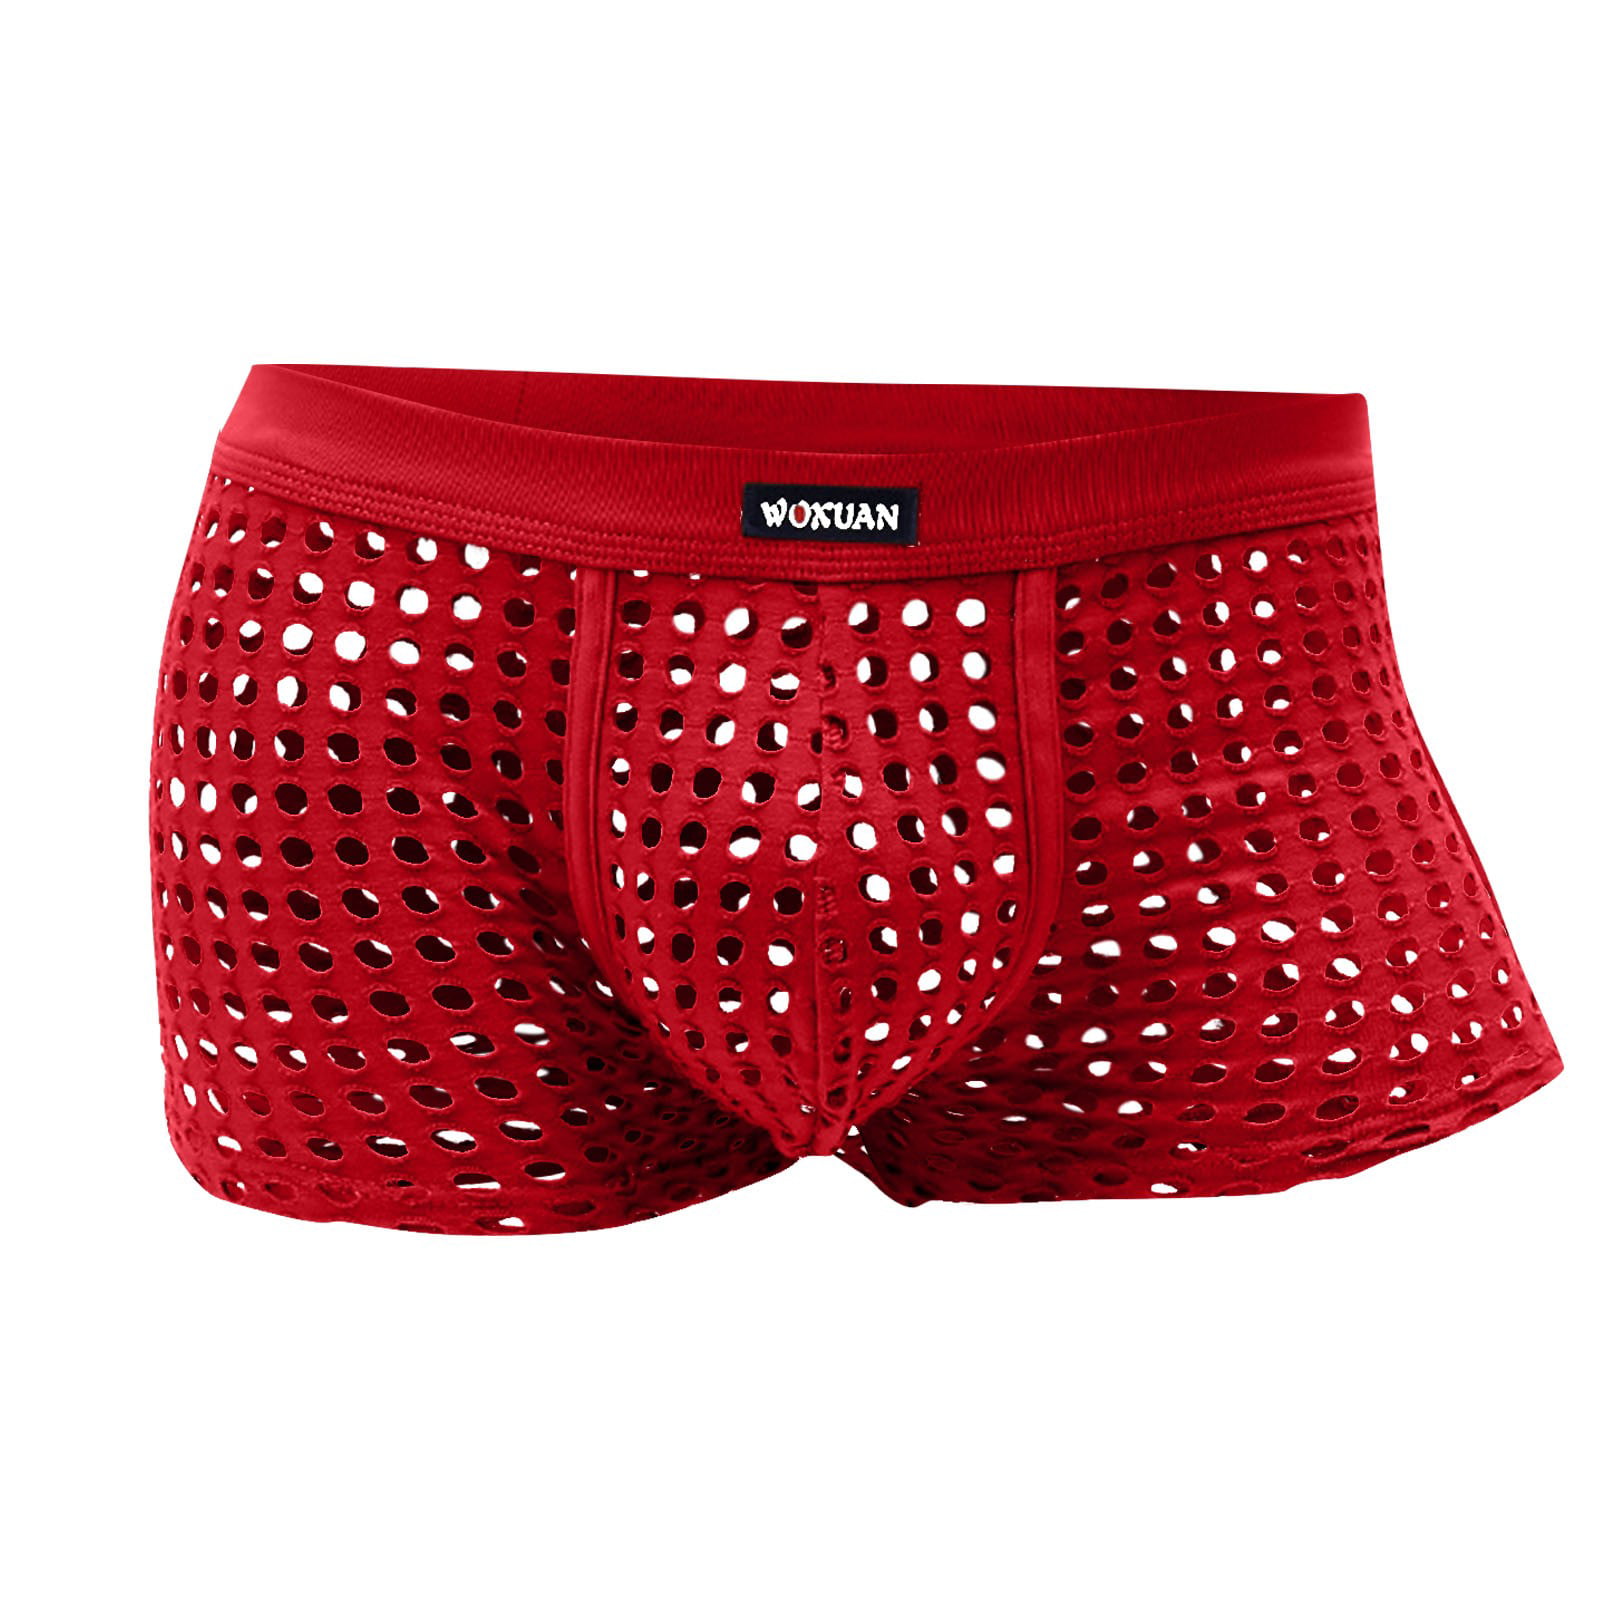 OVTICZA Sexy Underwear for Men Ruffle Hollow Out Pouch Sexy Boxer Briefs,3  Pack Red XL